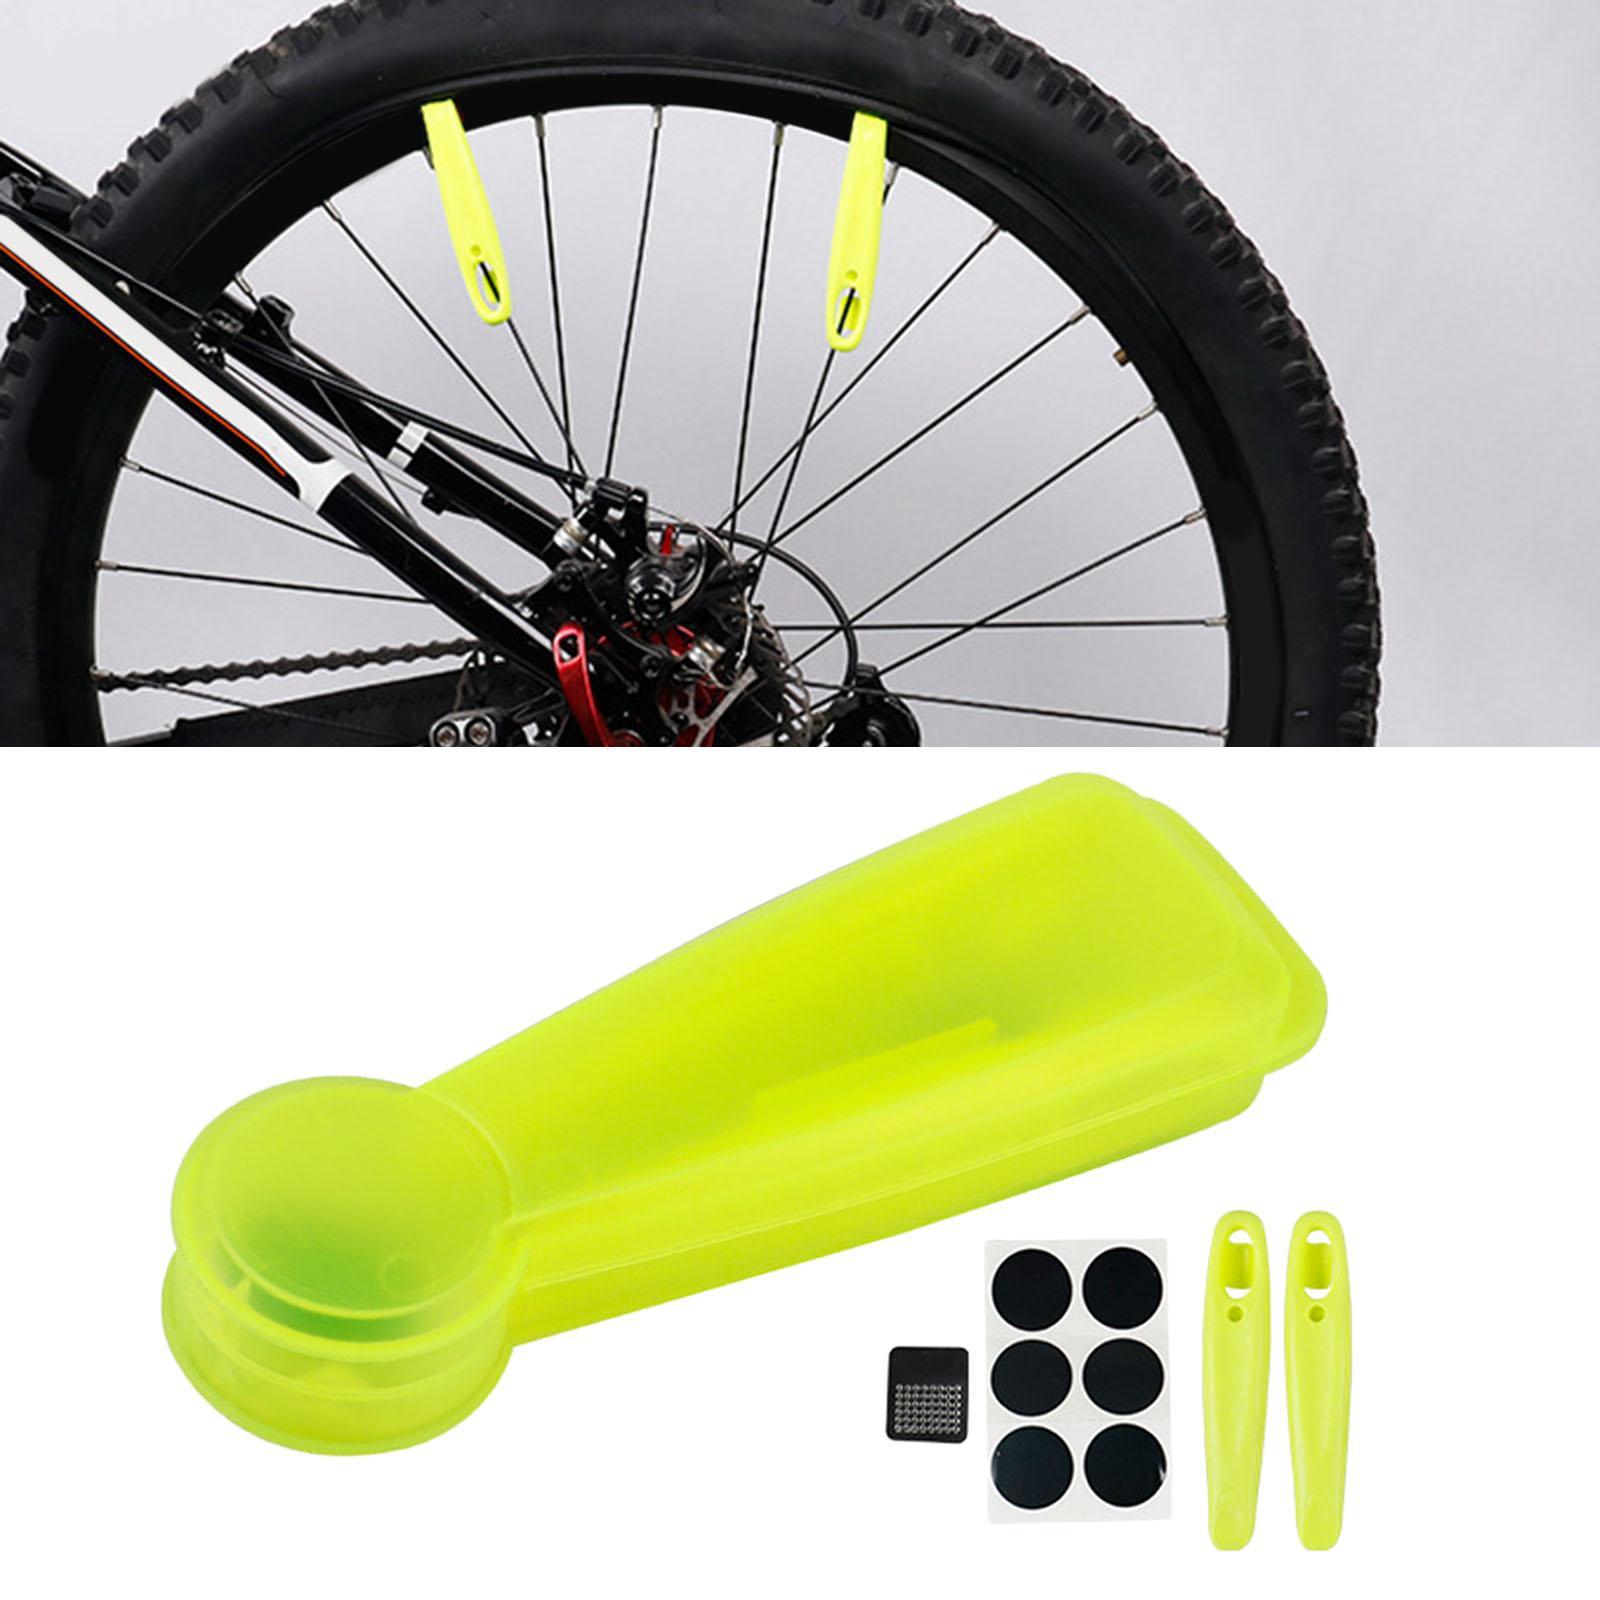 Bicycle Bike Cycle Inner Tube Tyre Puncture Repair Portable Tool Kit Patch